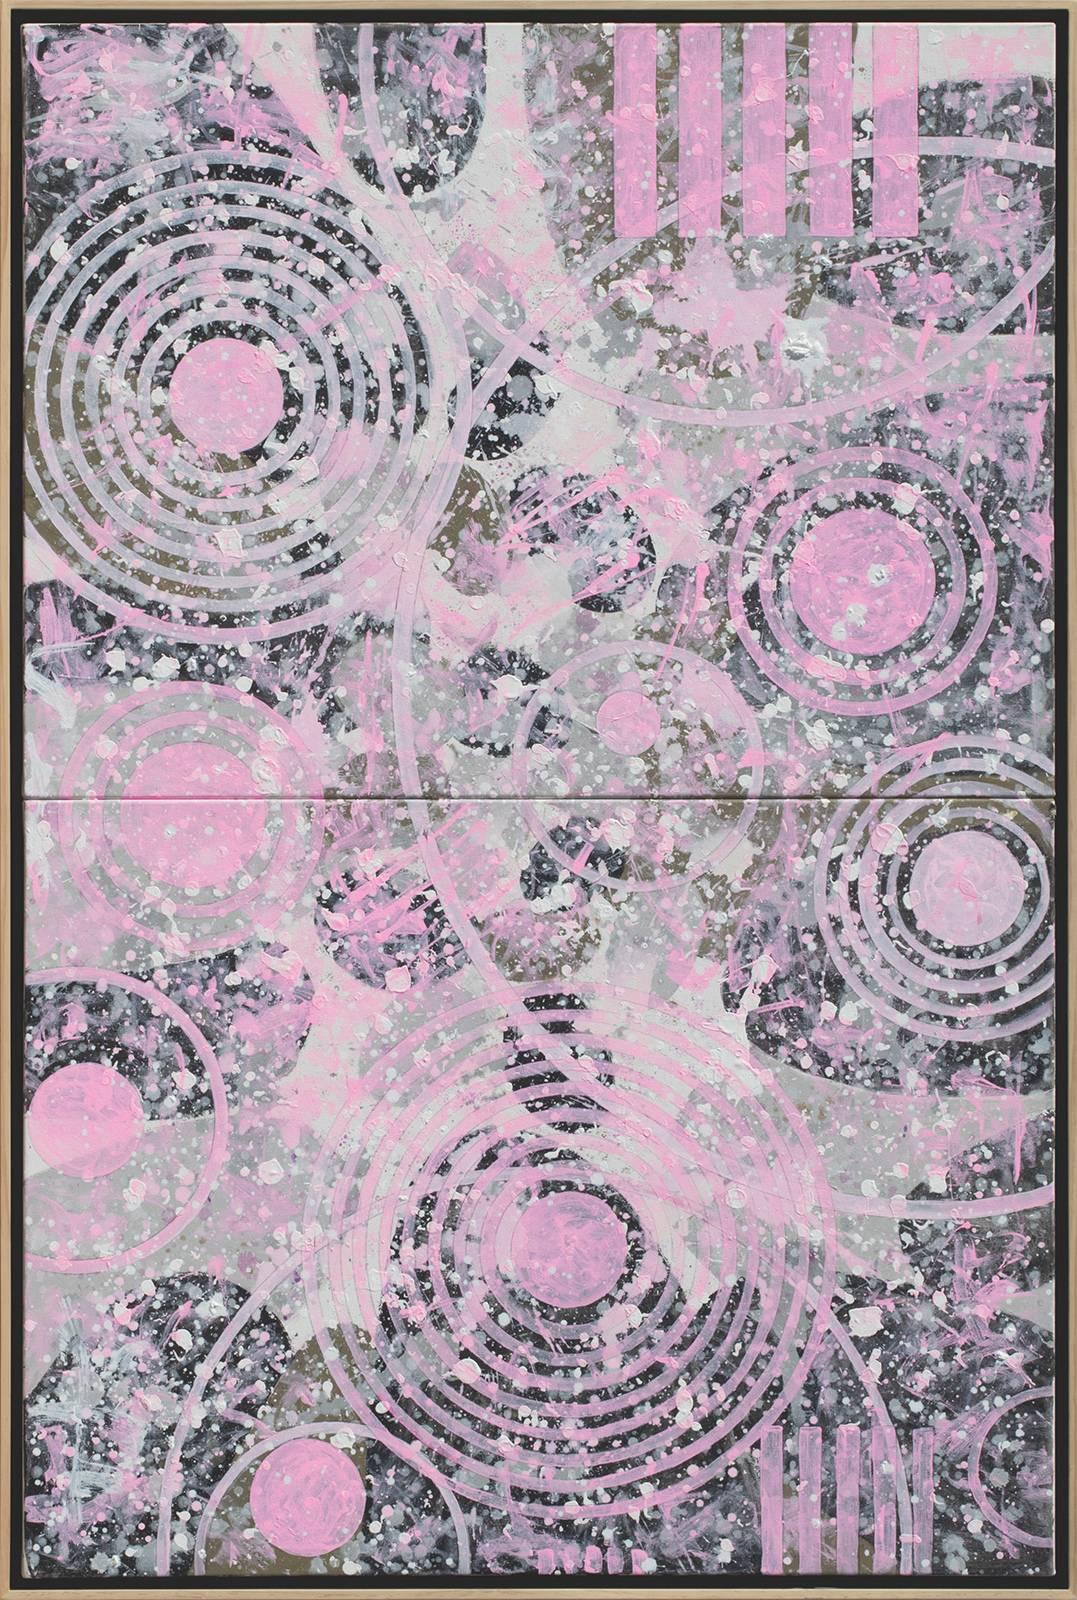 Pink Concentric Party (Black, Grey, Abstract Expressionist Painting) - Gray Abstract Painting by J. Steven Manolis